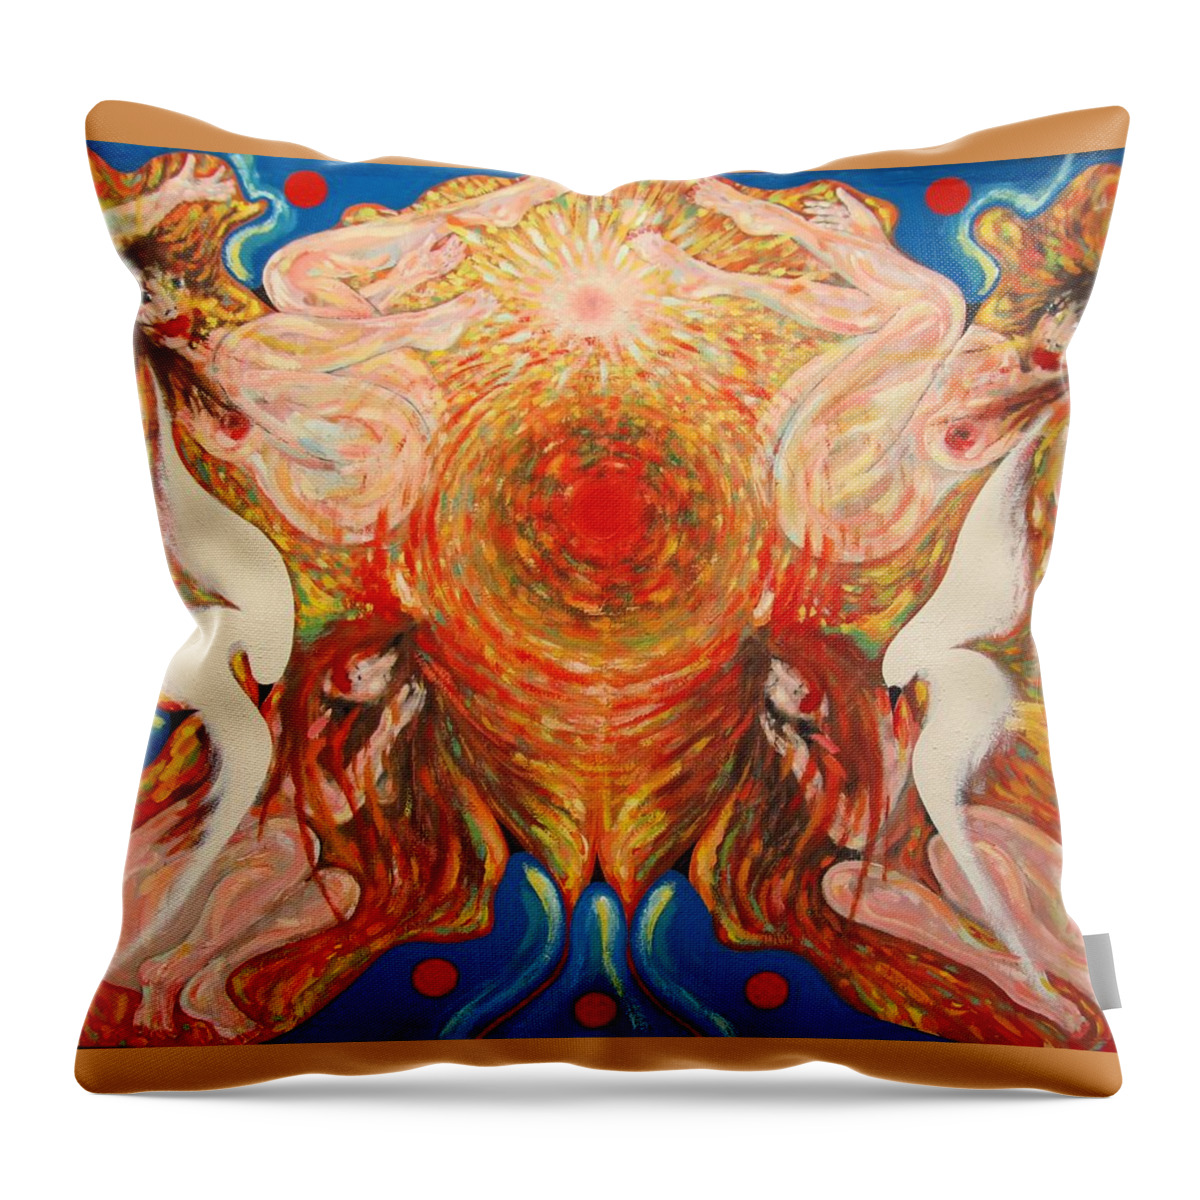 Imagination Throw Pillow featuring the painting Whirl by Wojtek Kowalski